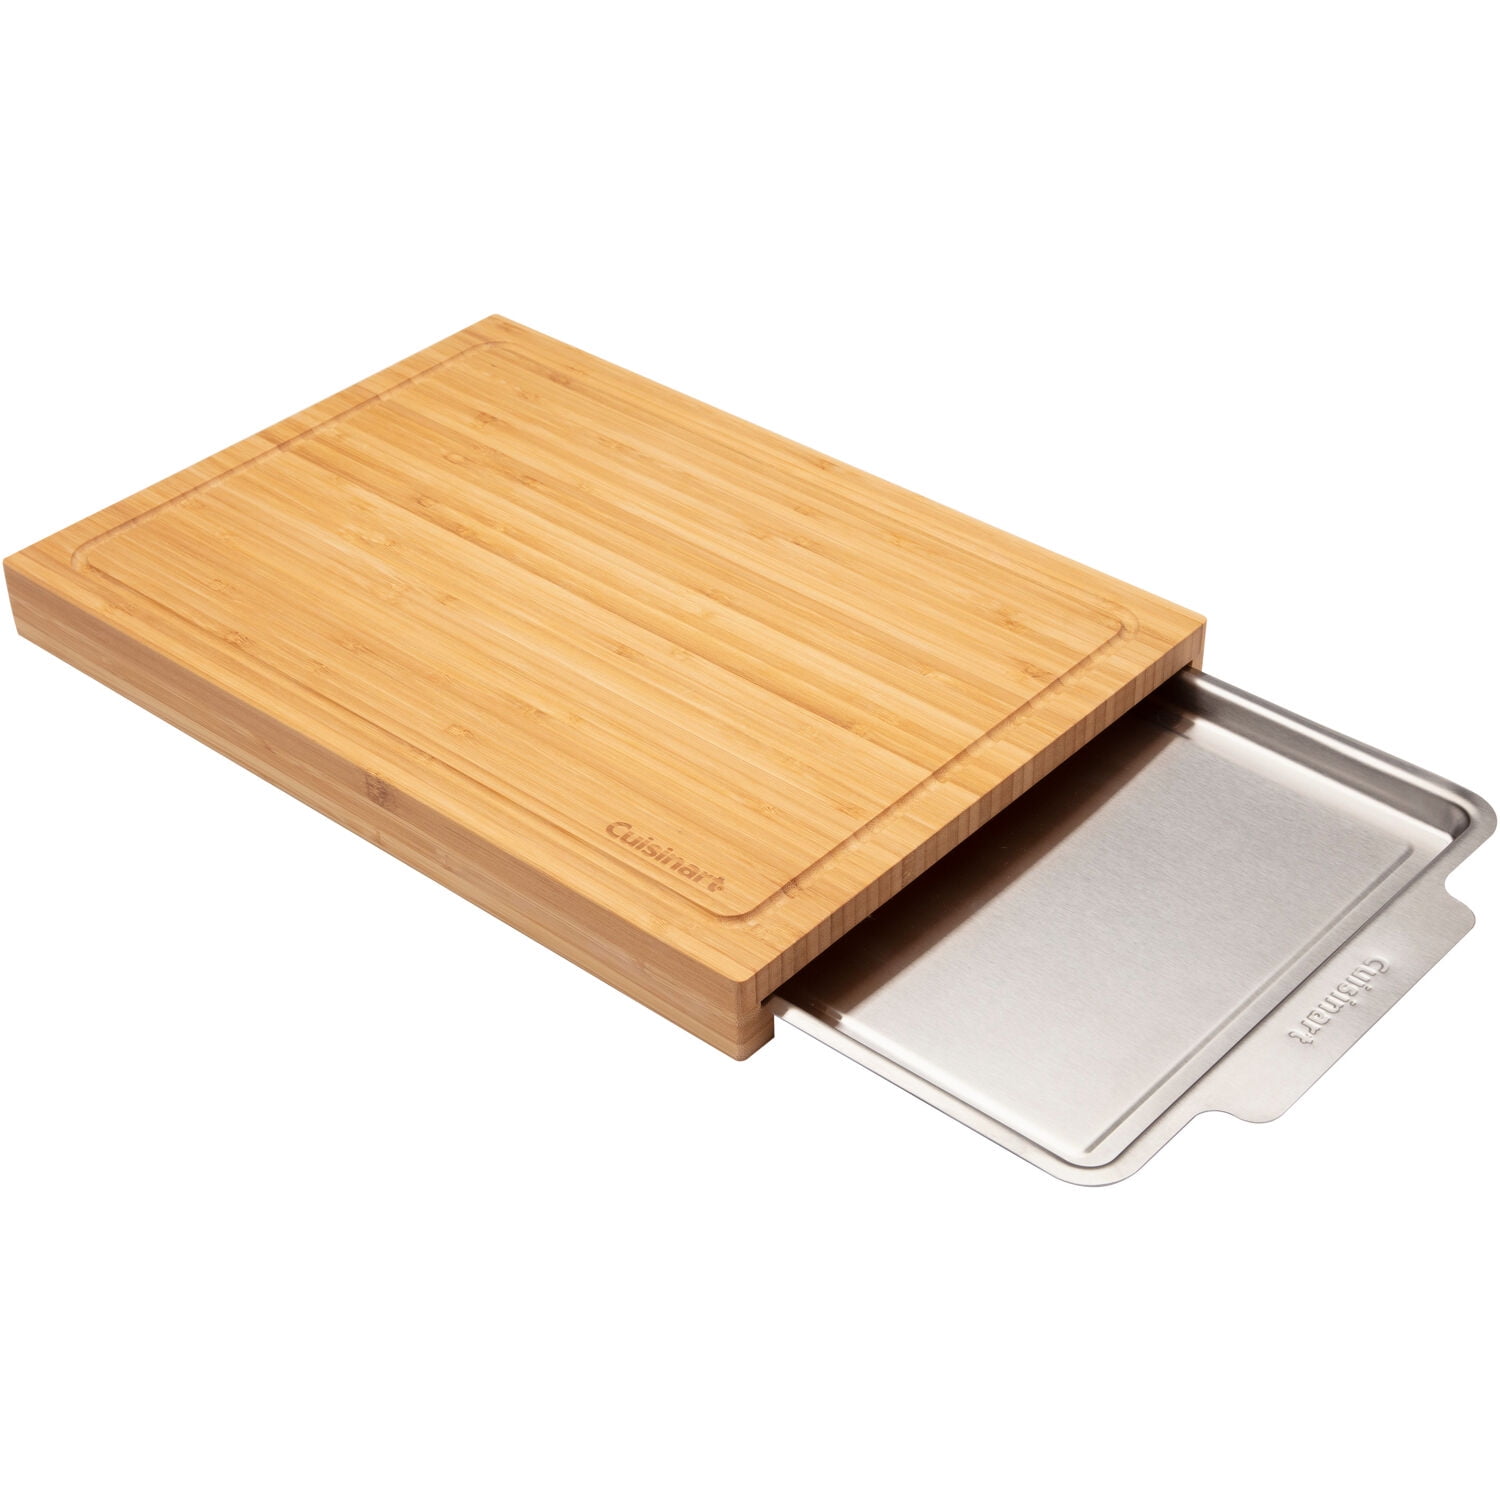 Bamboo Cutting Board With Tray, Bamboo Cutting Board With Sliding Out Tray, Chopping  Board With Non-slip Pads, Fruit Cutting Board With Stainless Steel Trays,  Kitchen Utensils, Apartment Essentials, Back To School Supplies 